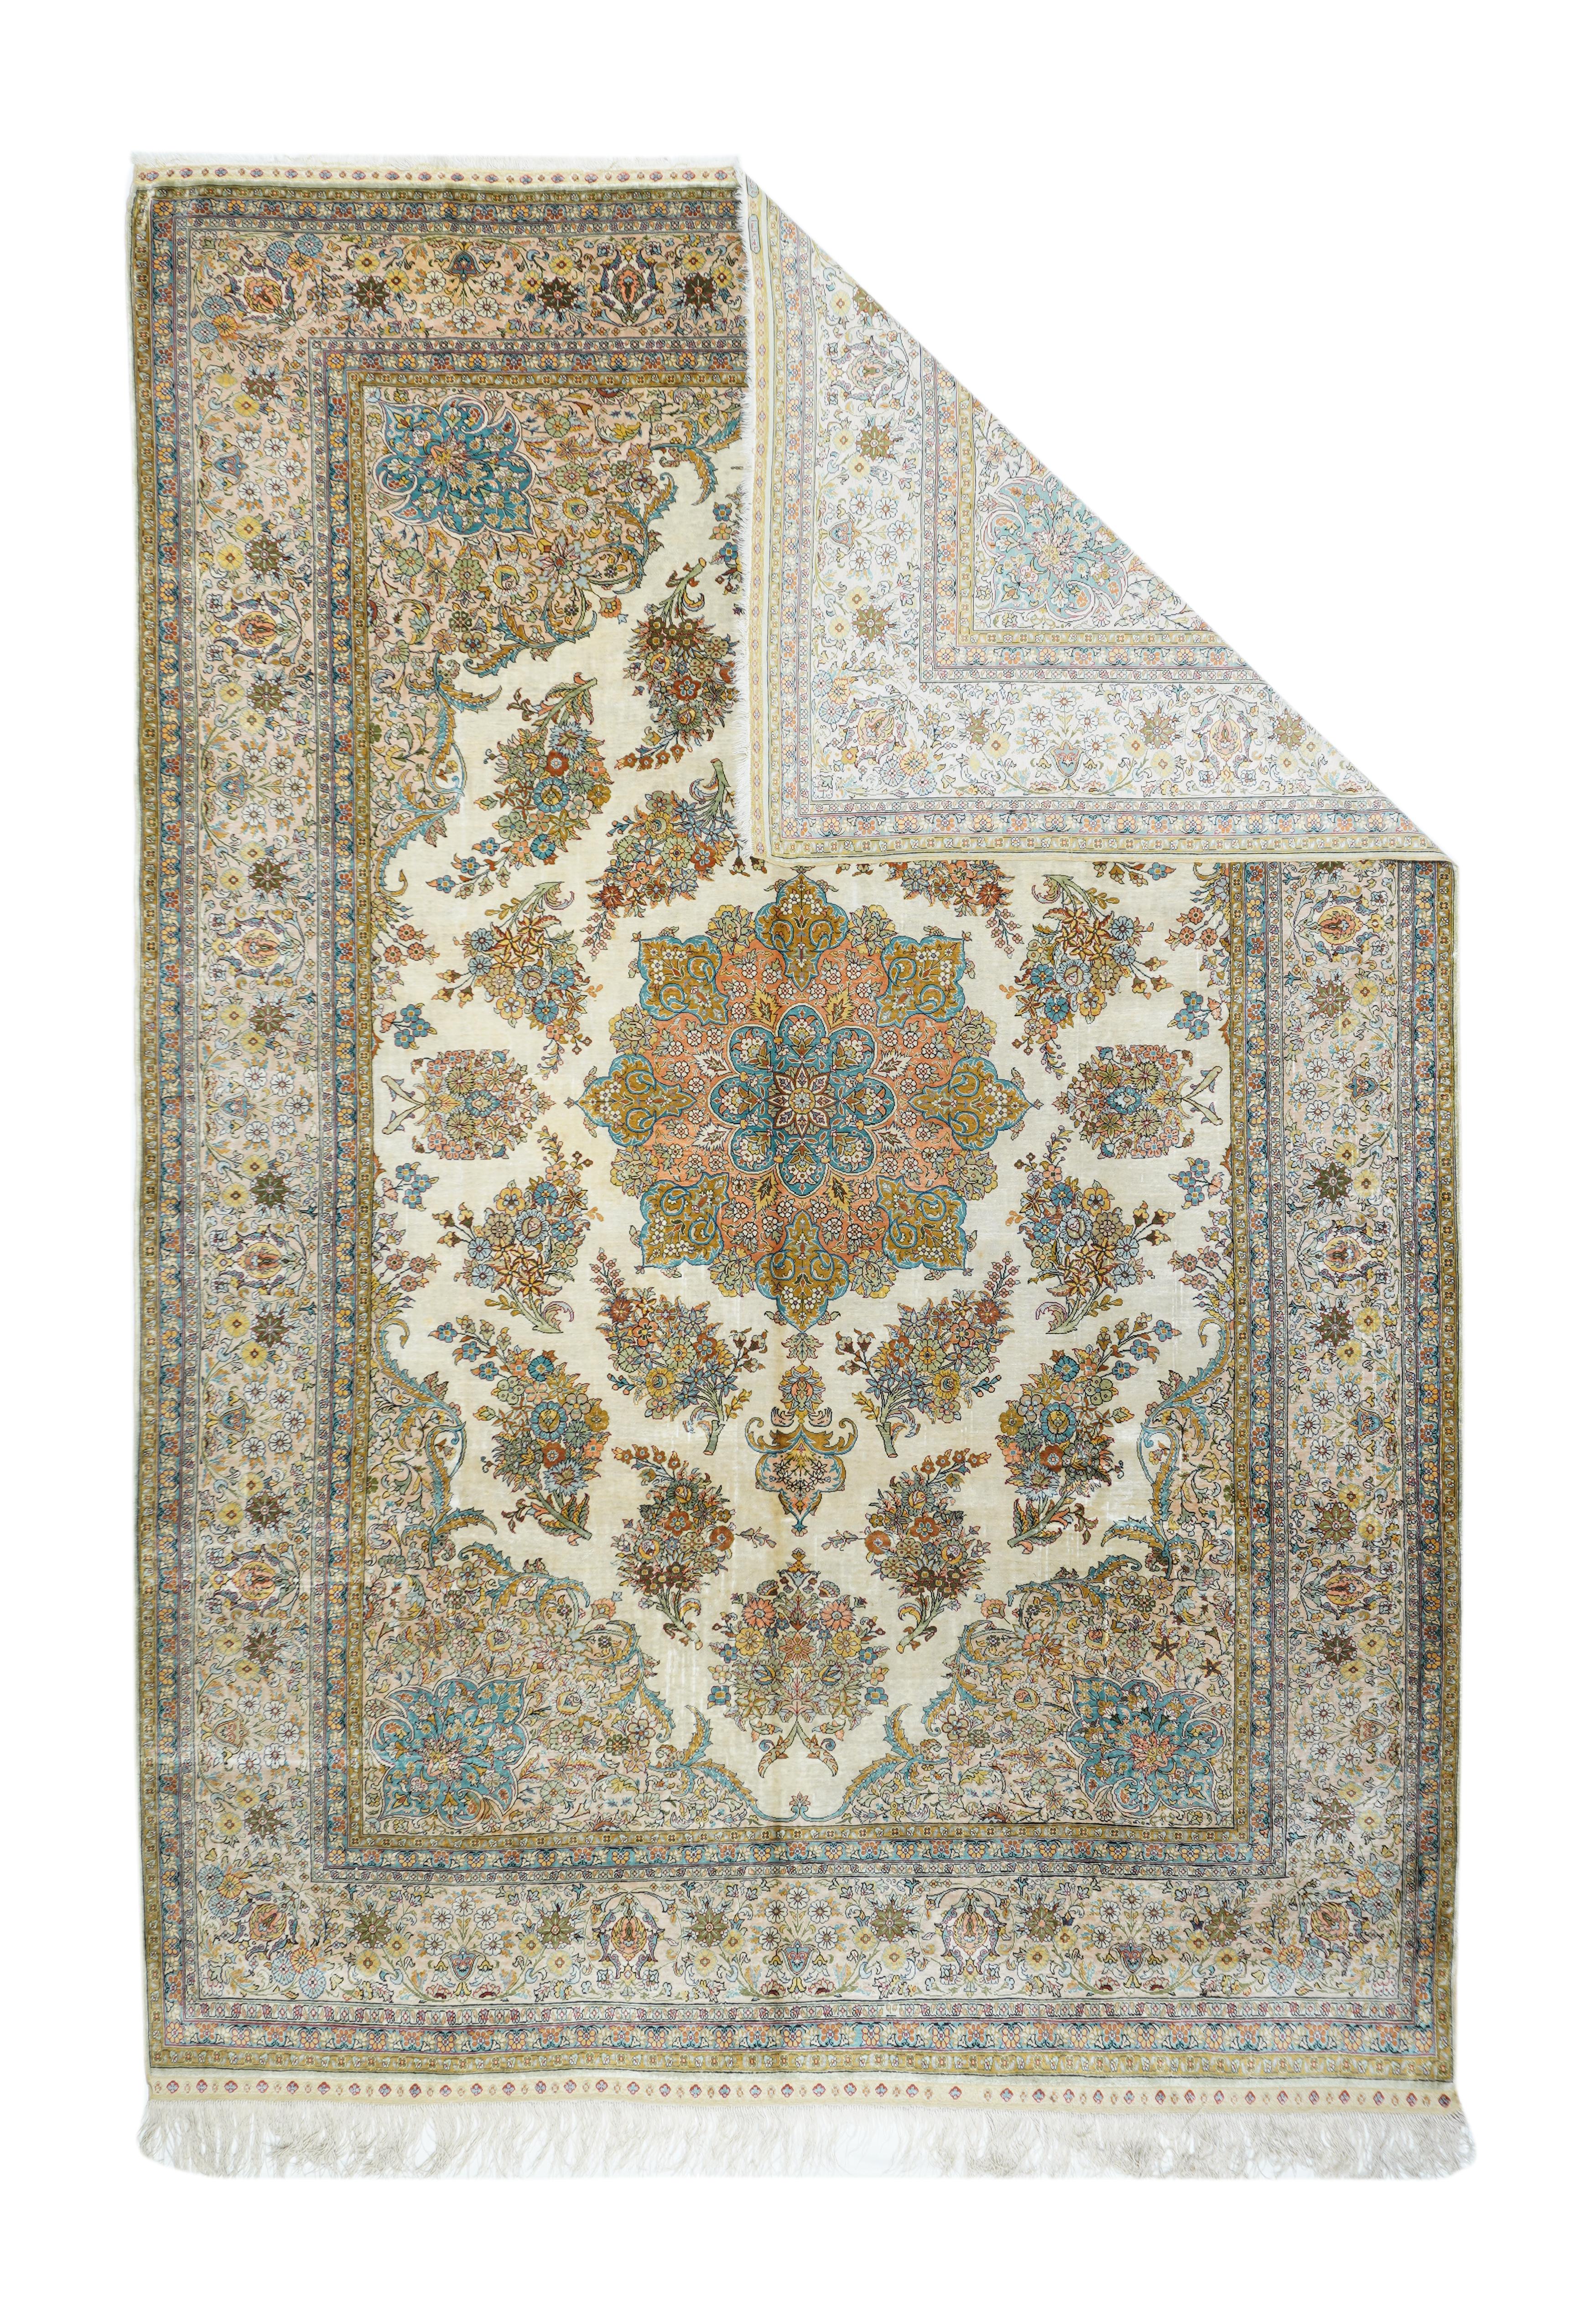 This very finely knotted Turkish city carpet from the Istanbul suburbs is completely Persian in style from the creamy ivory field with a round, 16 point and lobe medallion surrounded by two broken wreaths of intensely floriated botehs. Surging